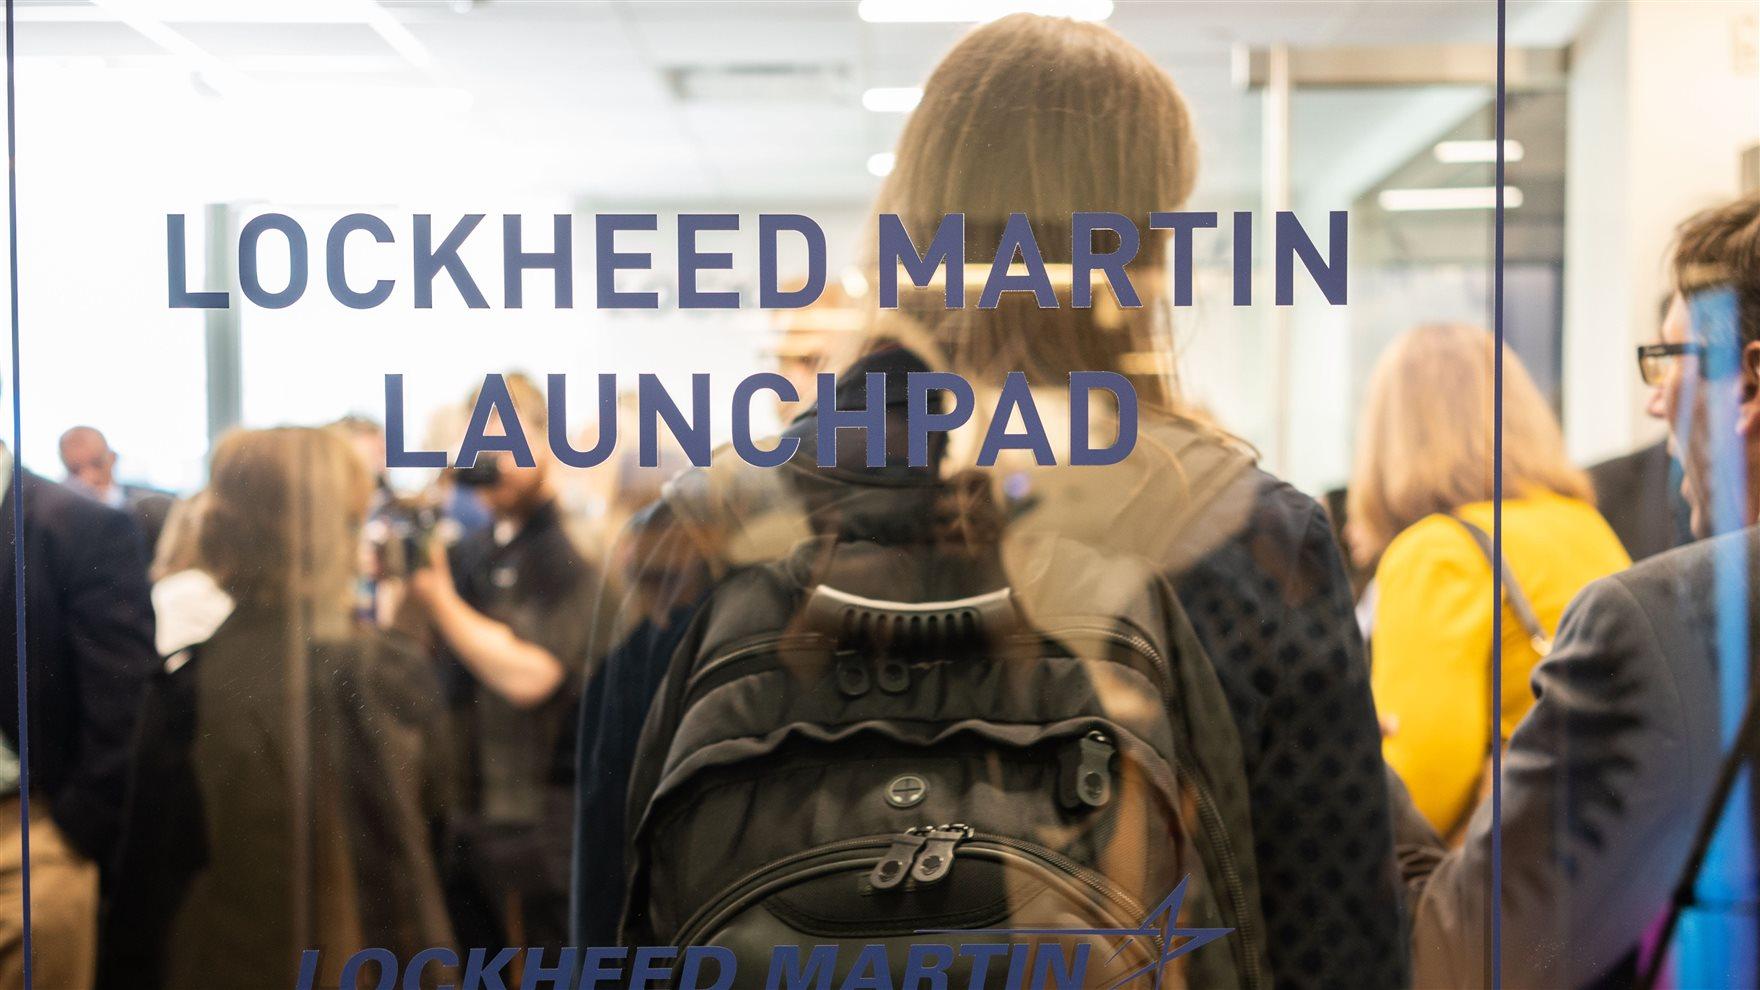 View of the Lockheed Martin Launchpad filled with people.